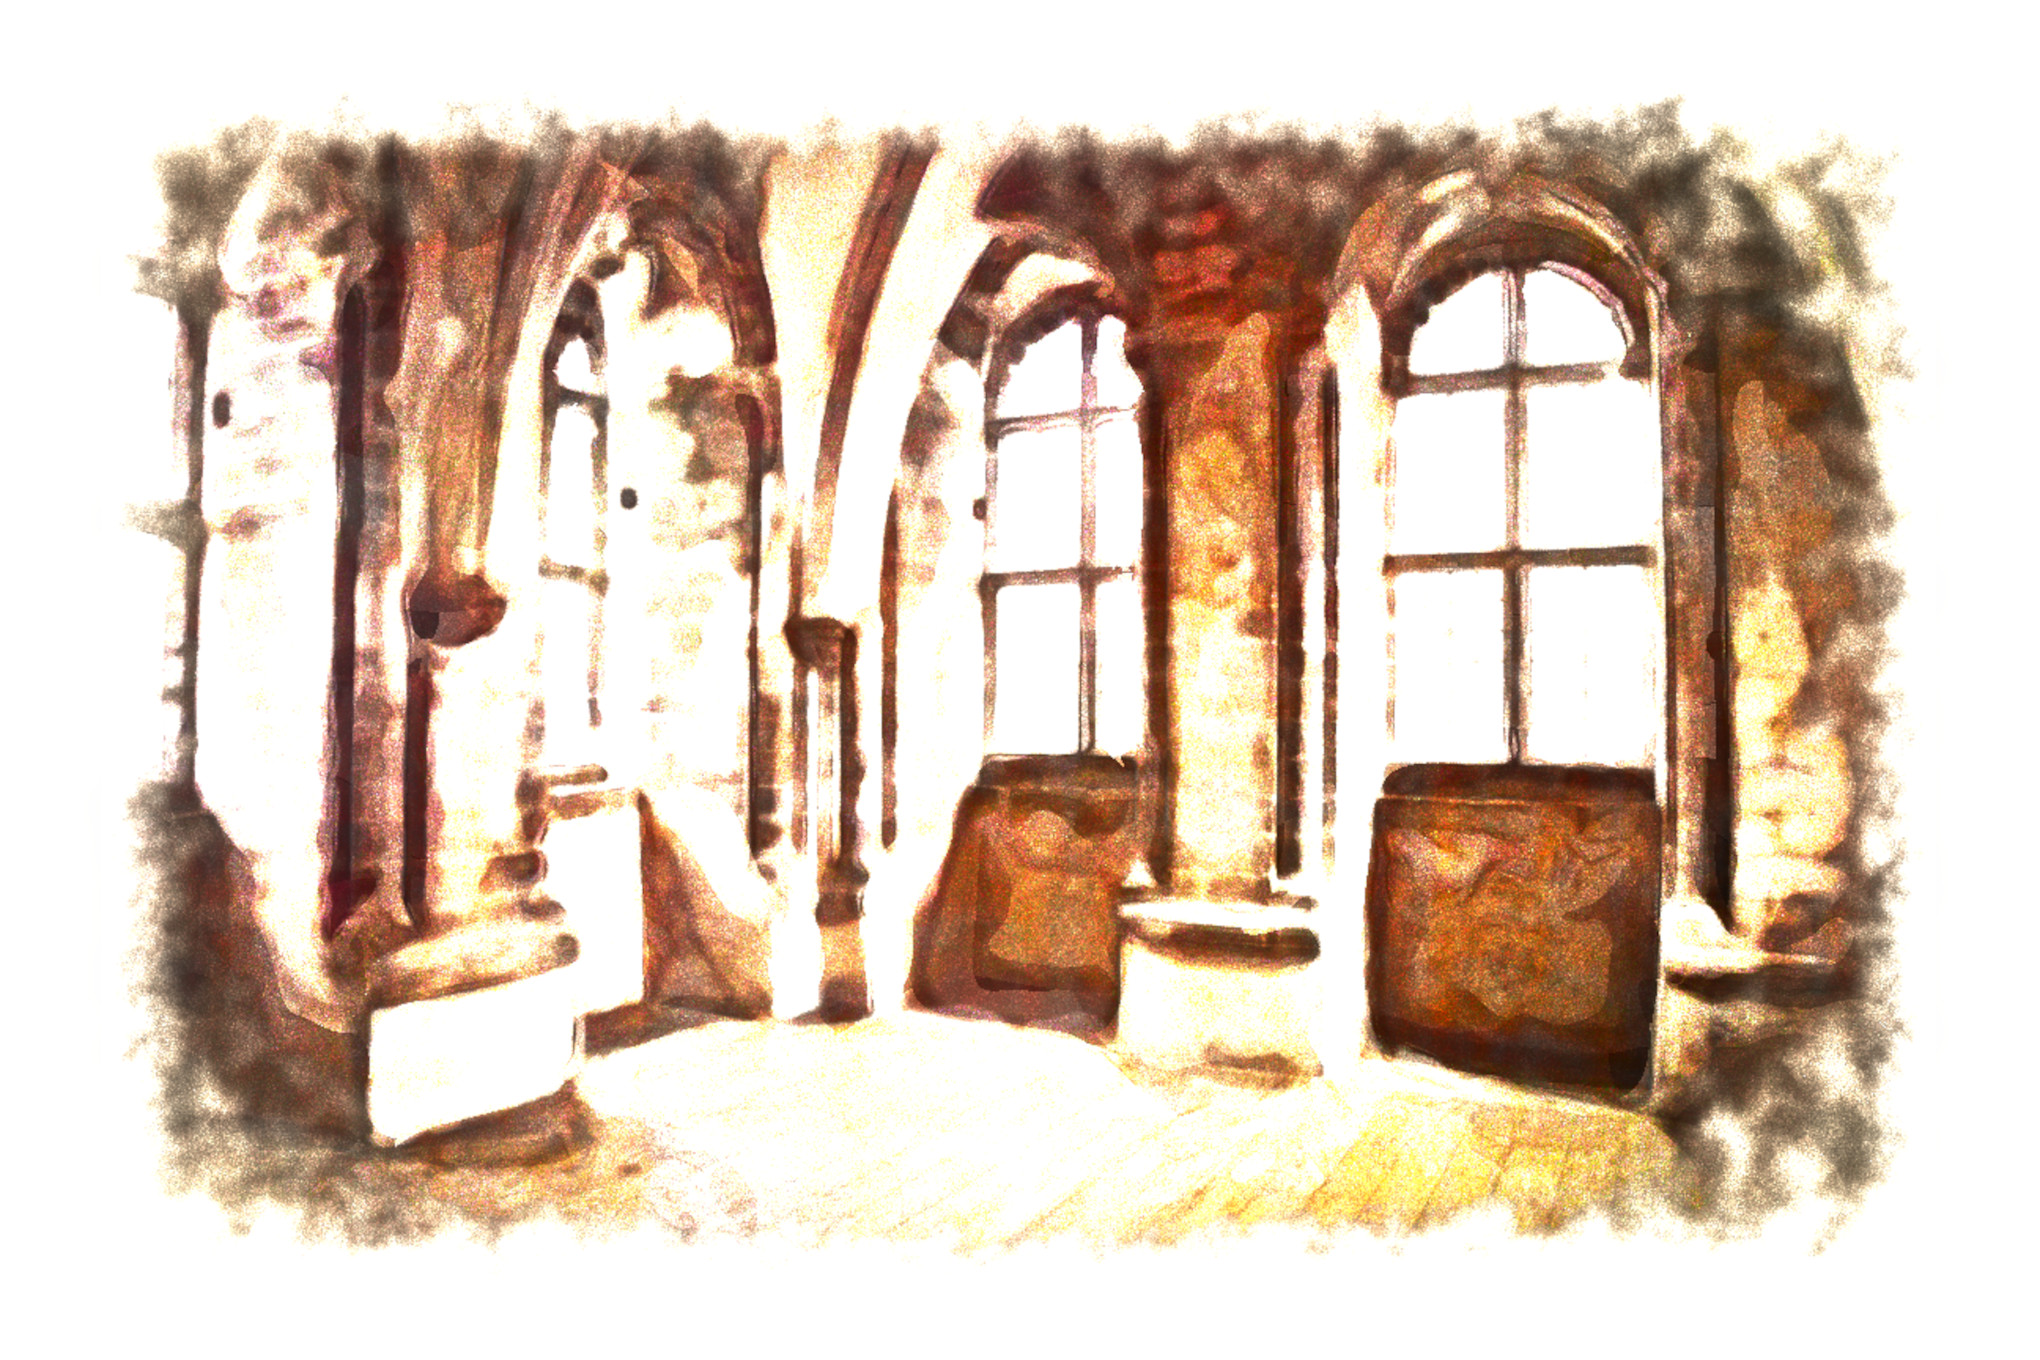 2023-09-30 18-16-19 gothic_castle_room_by_nickistock_d2gw2uk with a Watercolor Pastels Effect 2023 (4.0,75.0,32.0,50.0,10.0,8.0,75.0,False,1).jpg